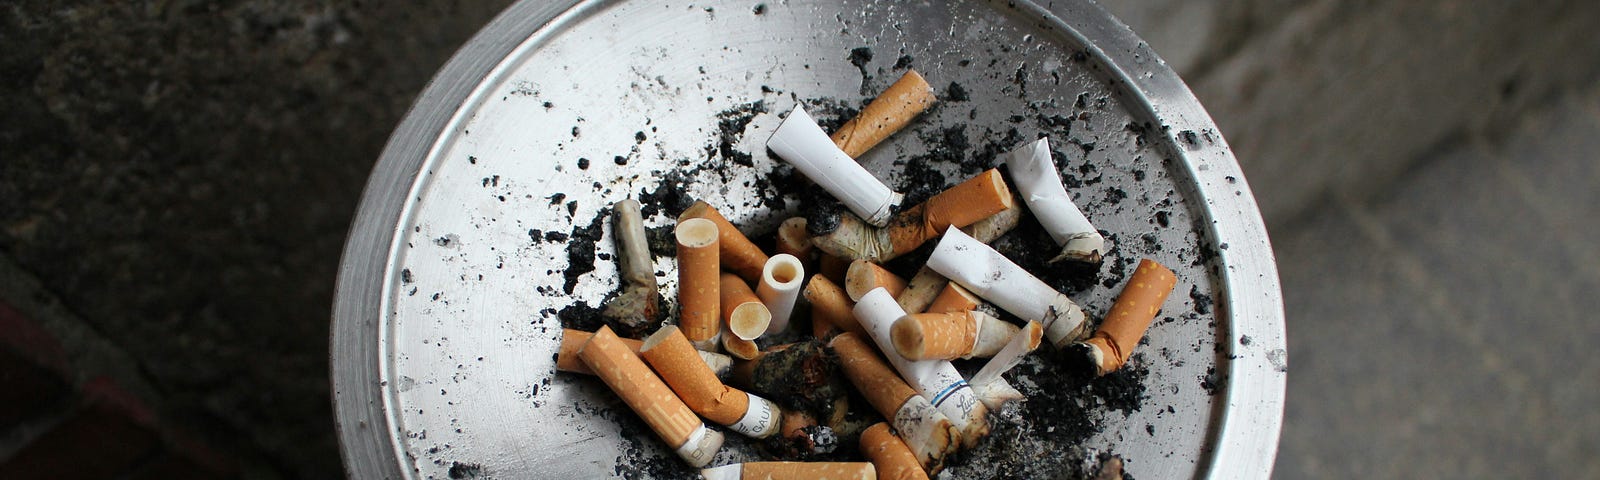 Cigarettes in an ash tray